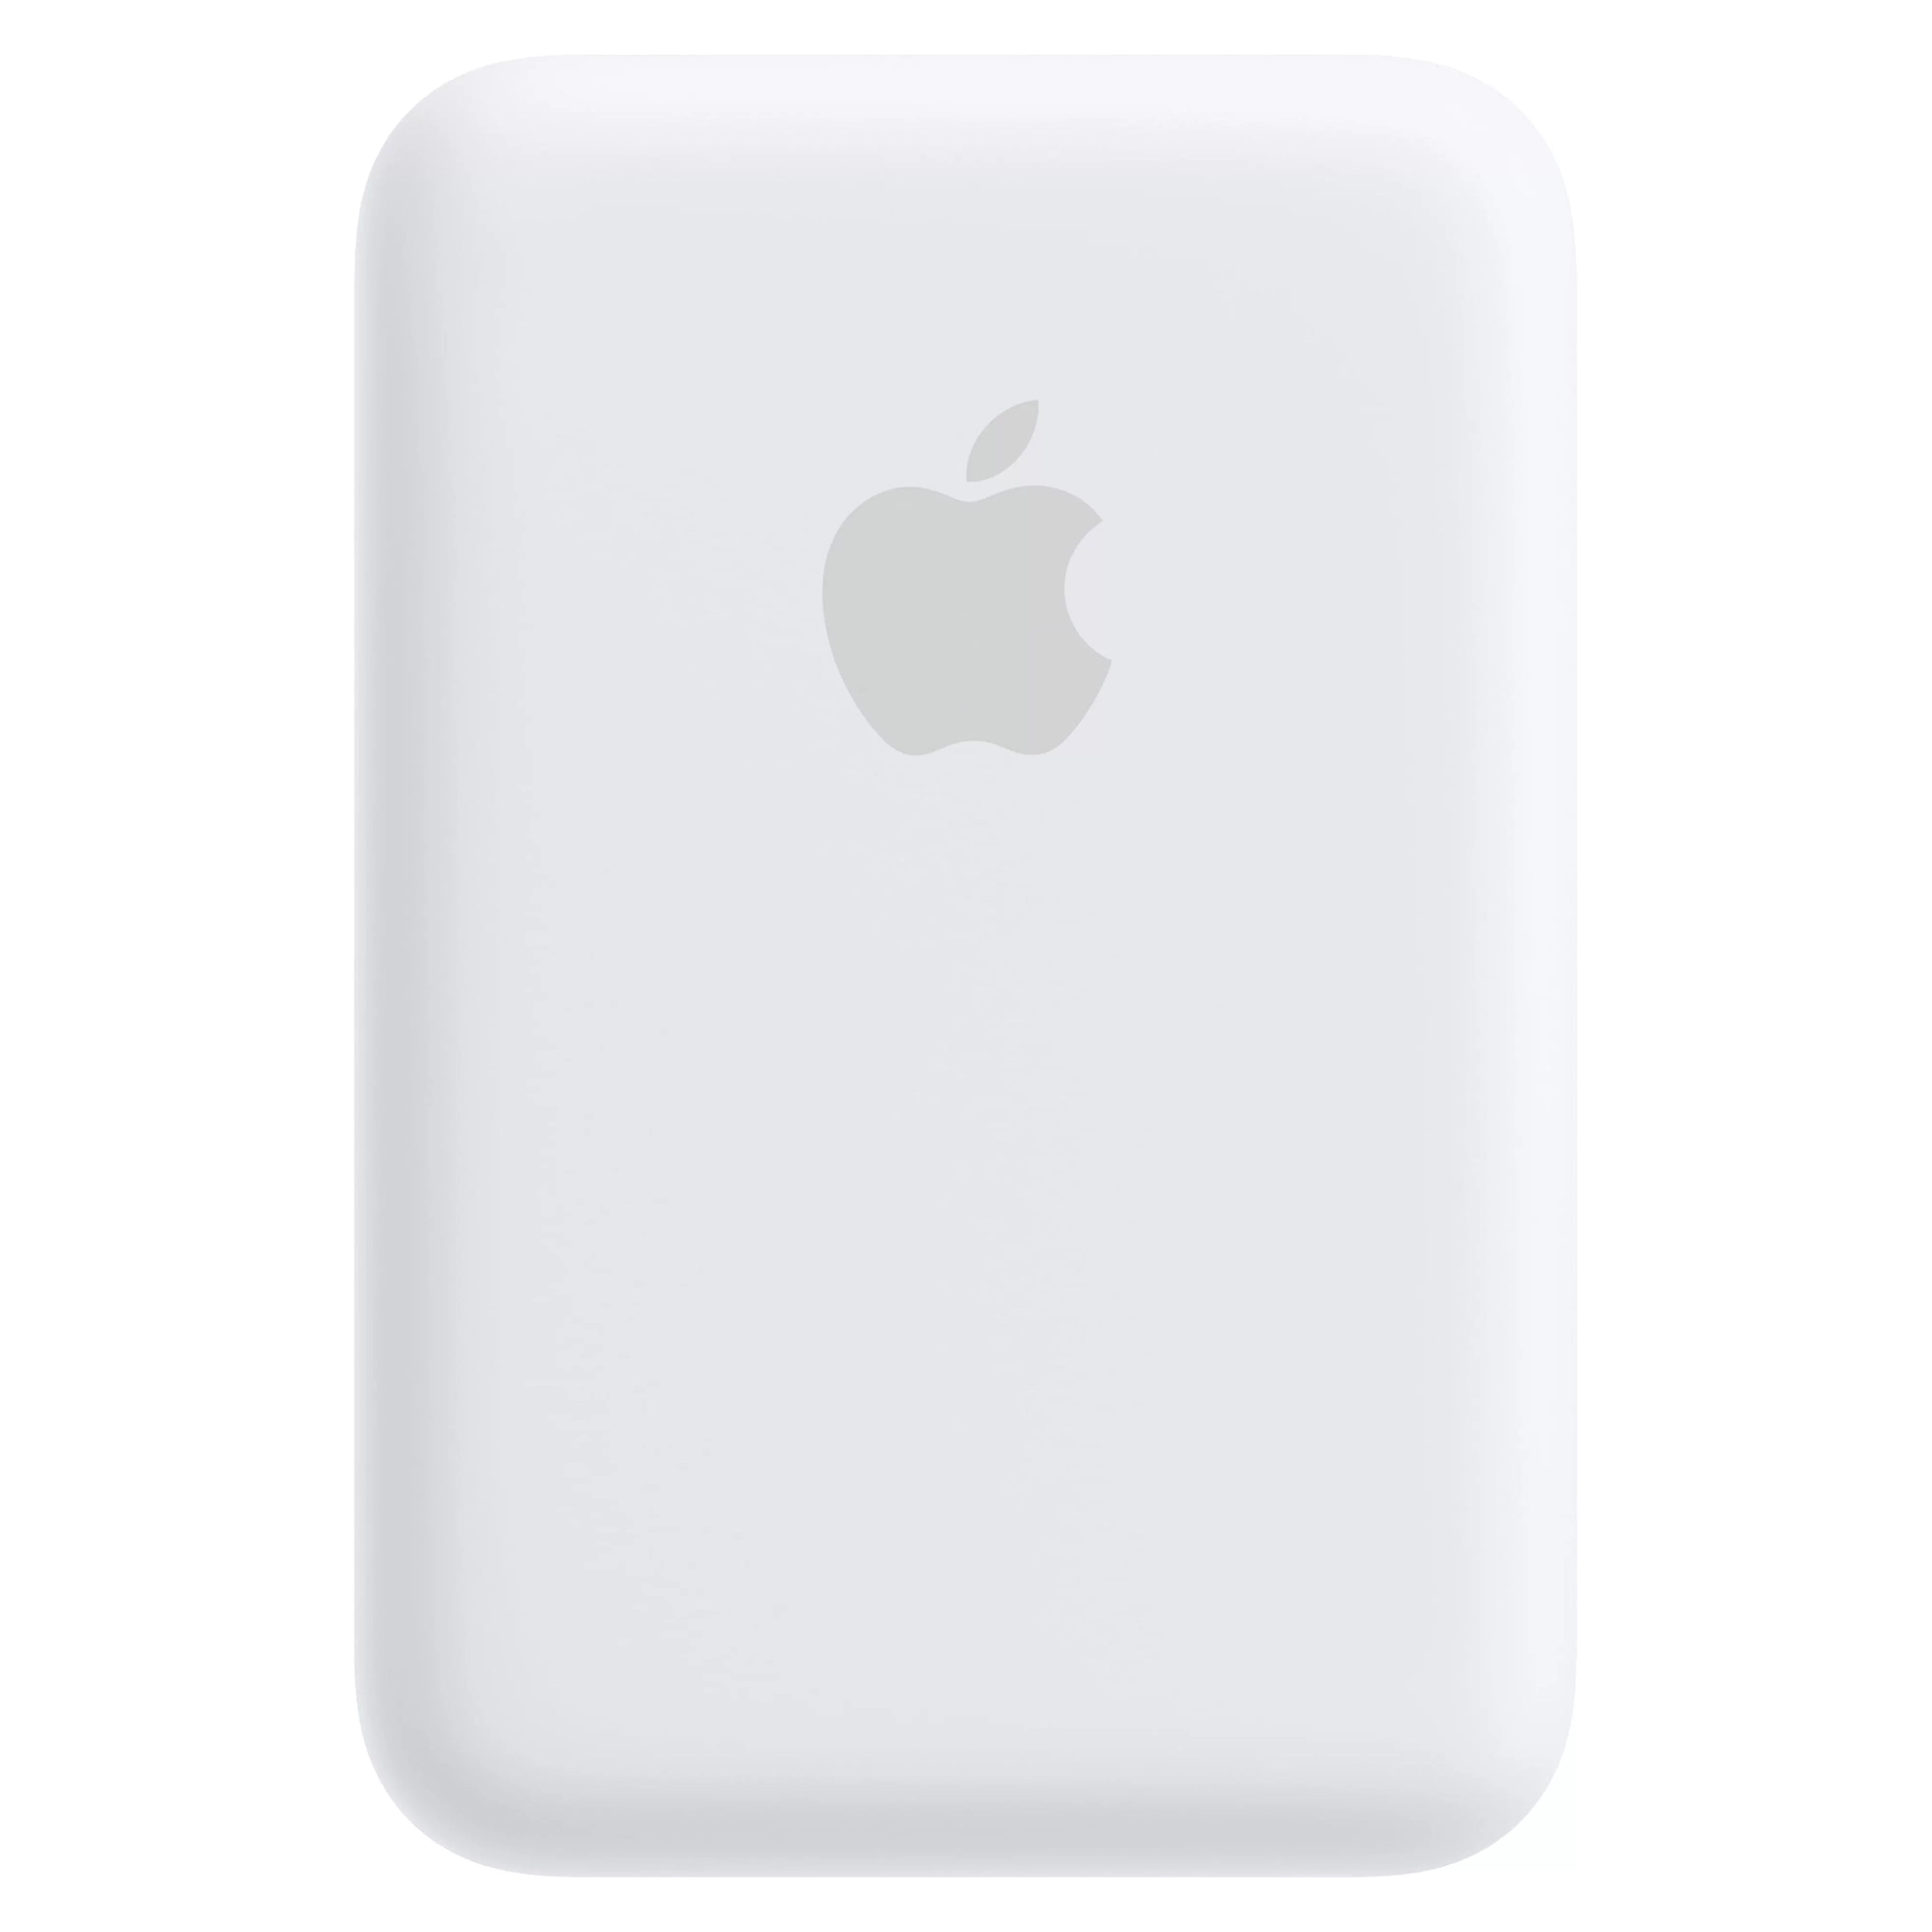 MagSafe Battery Pack - White - Battery Pack | Walmart (US)